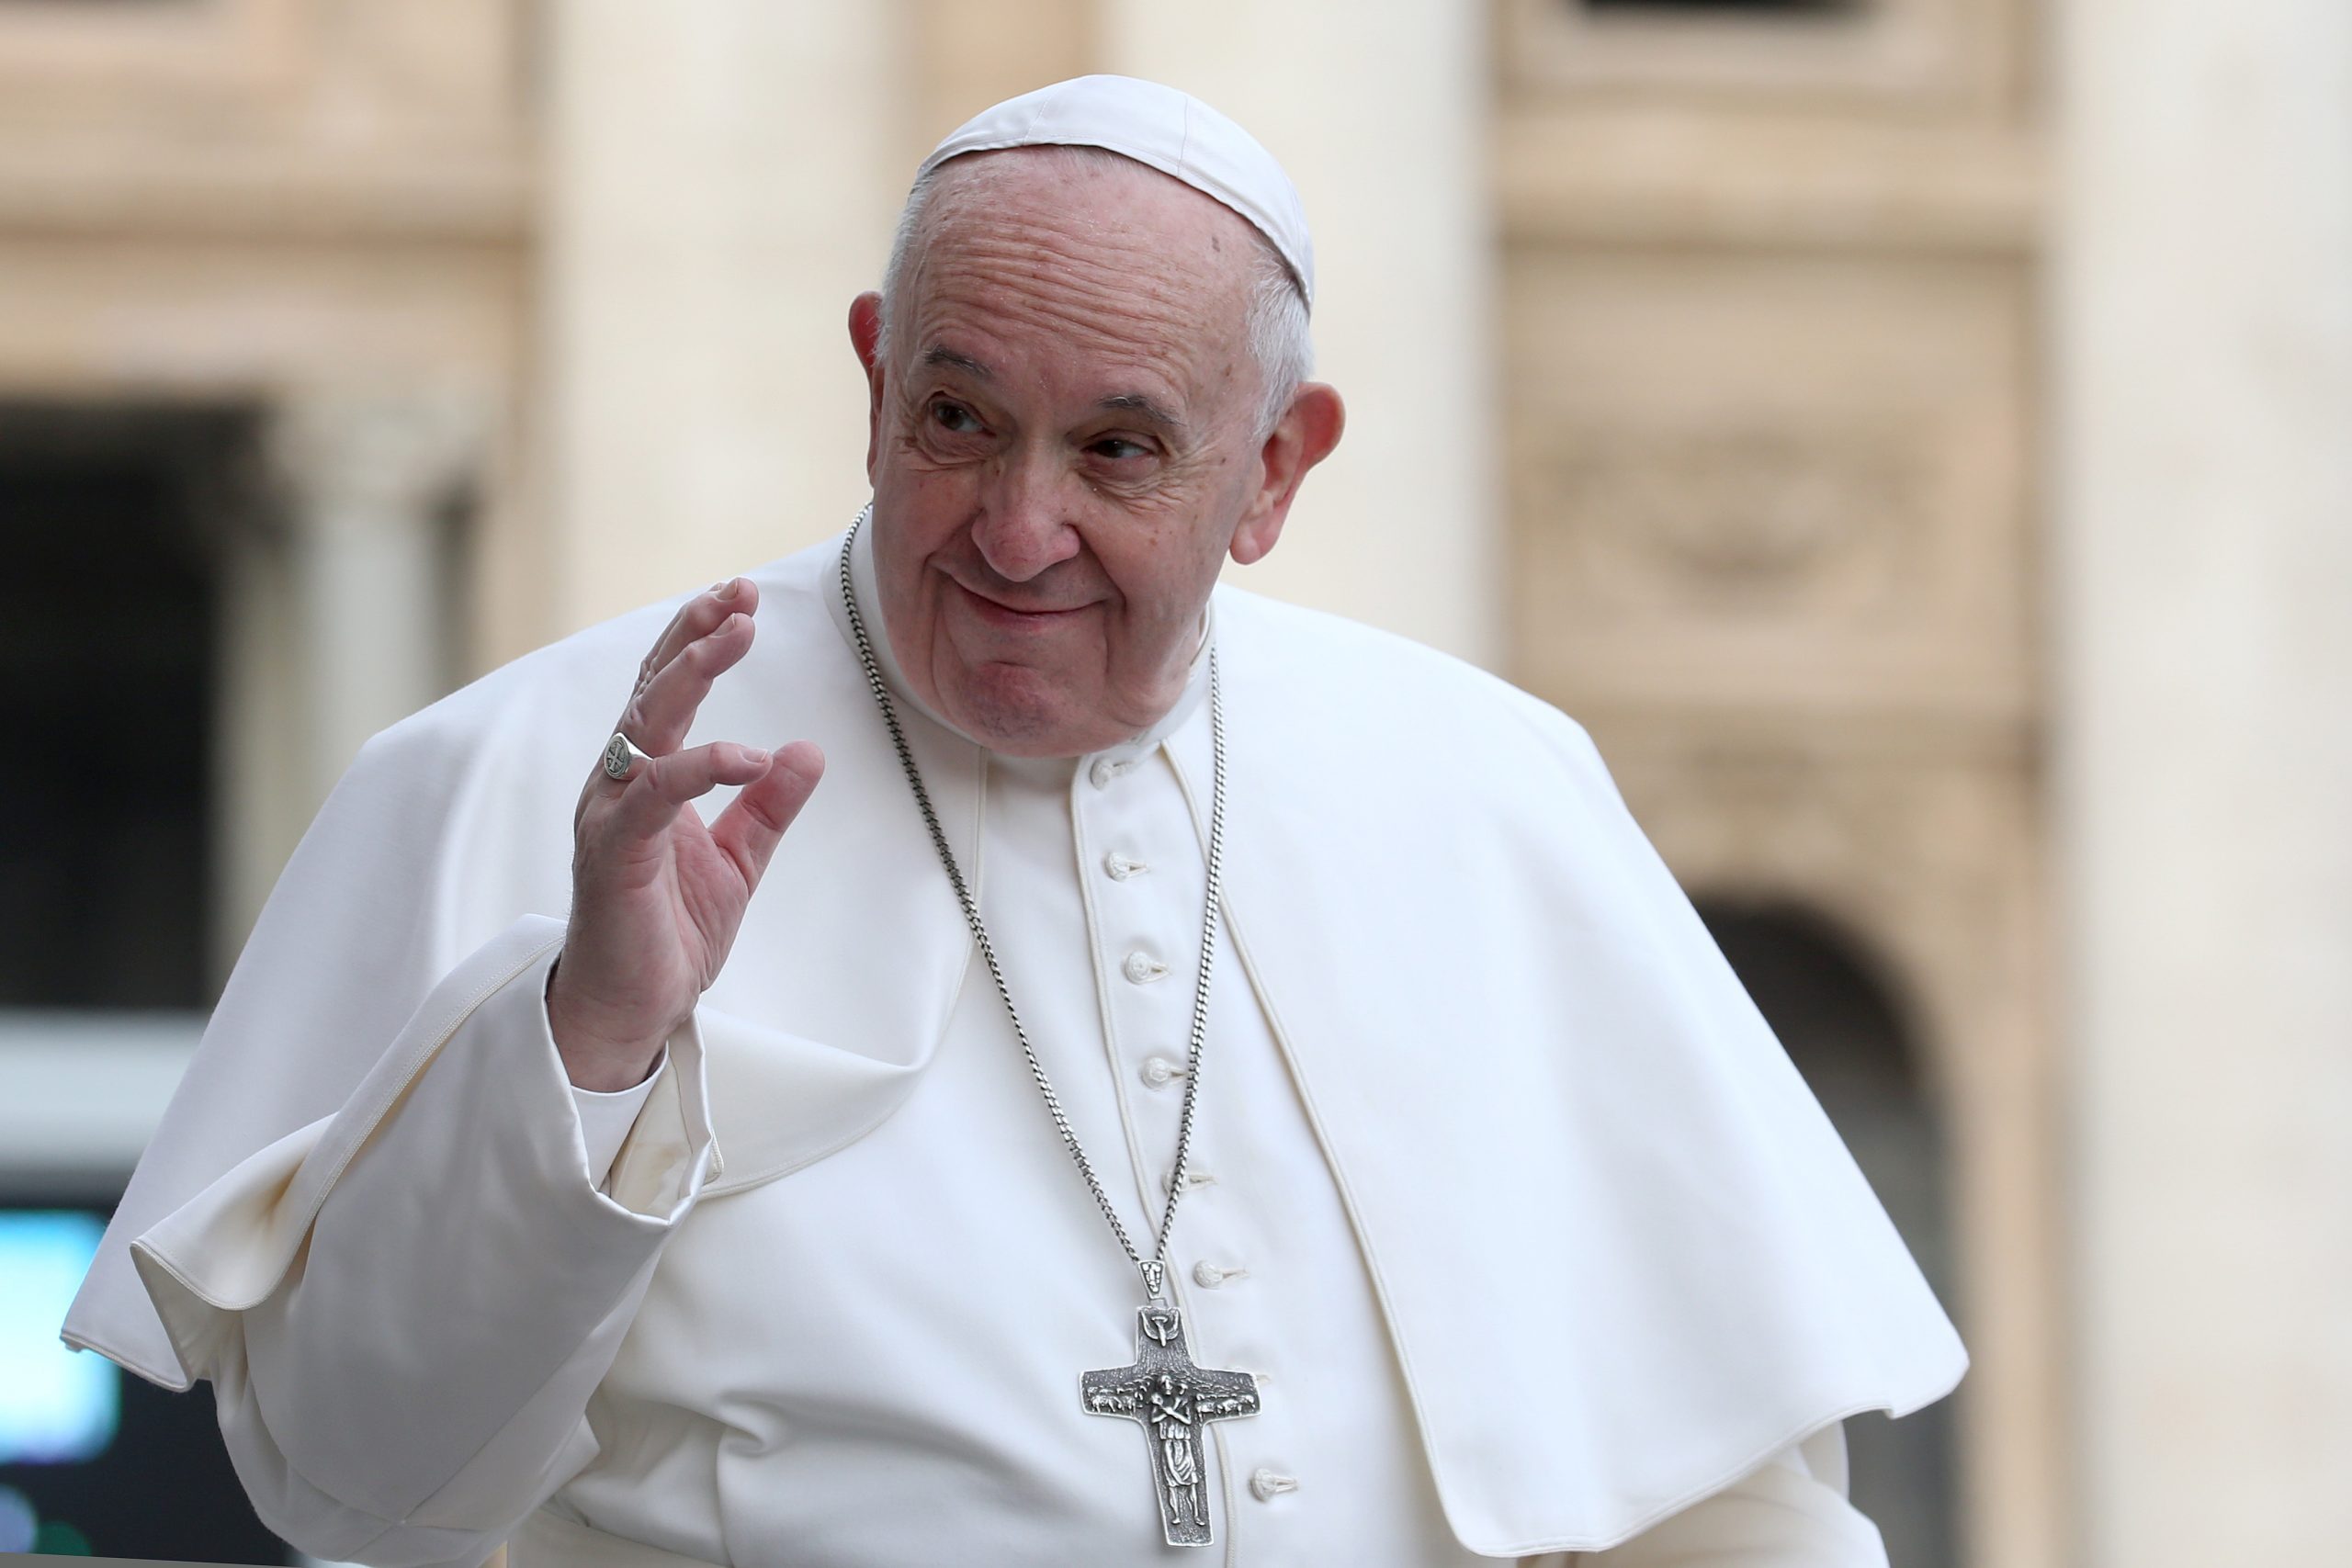 13 Surprising Things You Didn't About Being Pope | Reader's Digest